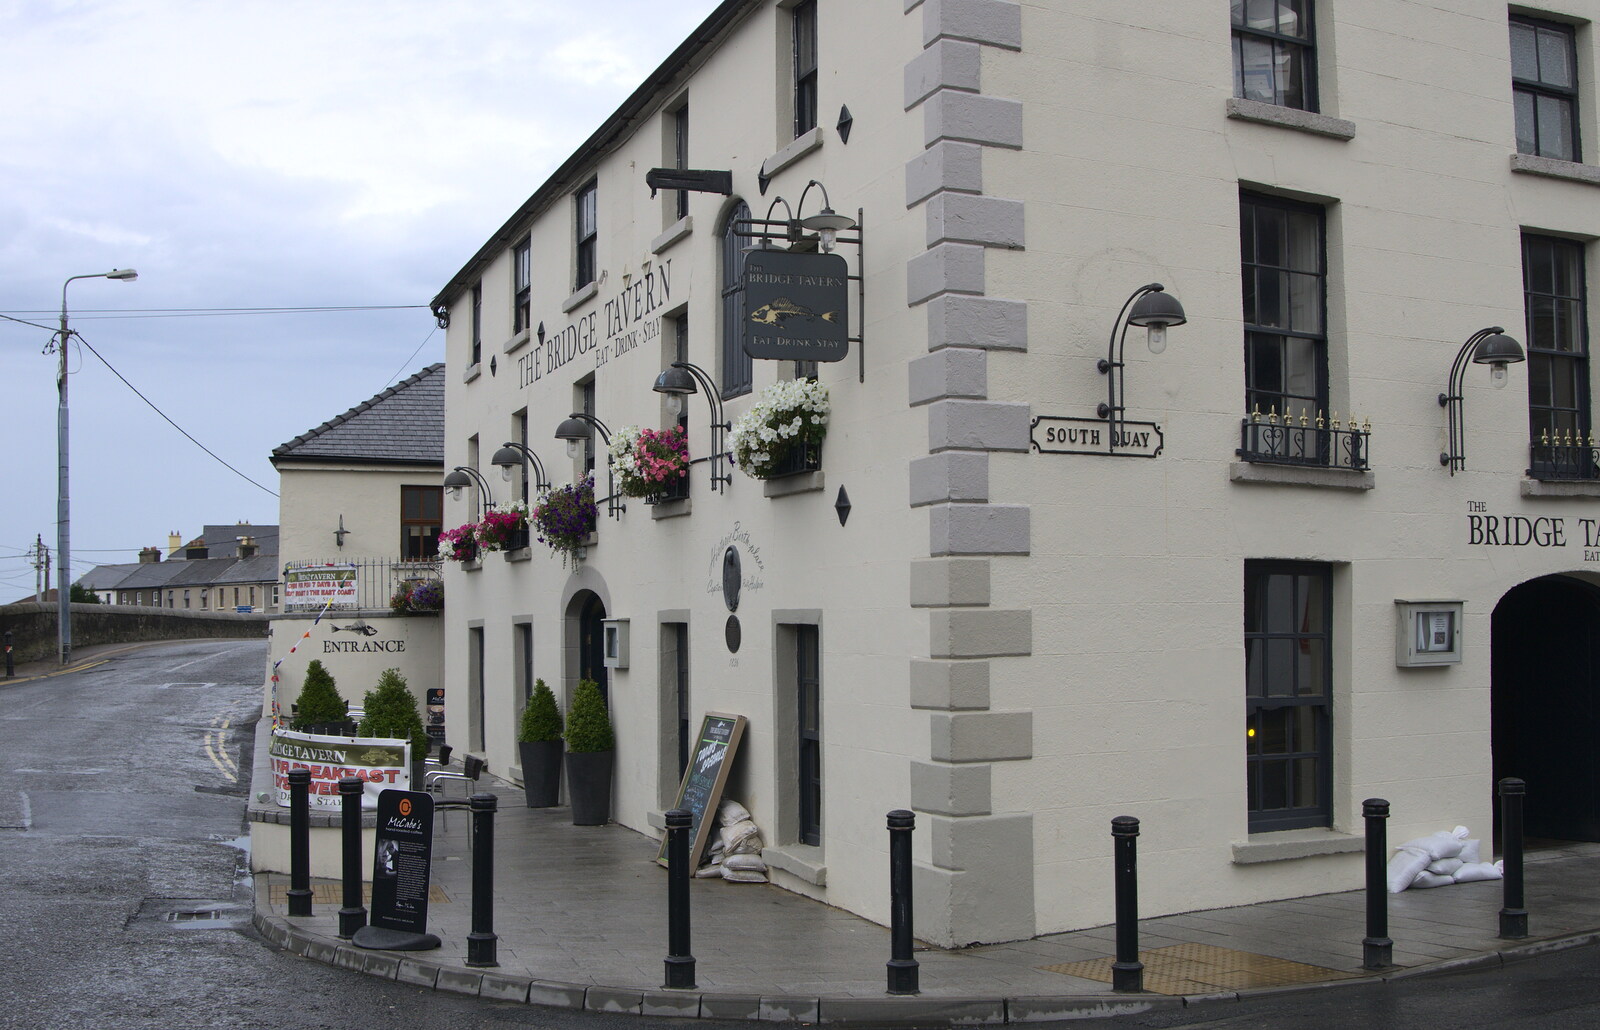 The Bridge Tavern on South Quay from Camping at Silver Strand, Wicklow, County Wicklow, Ireland - 7th August 2014